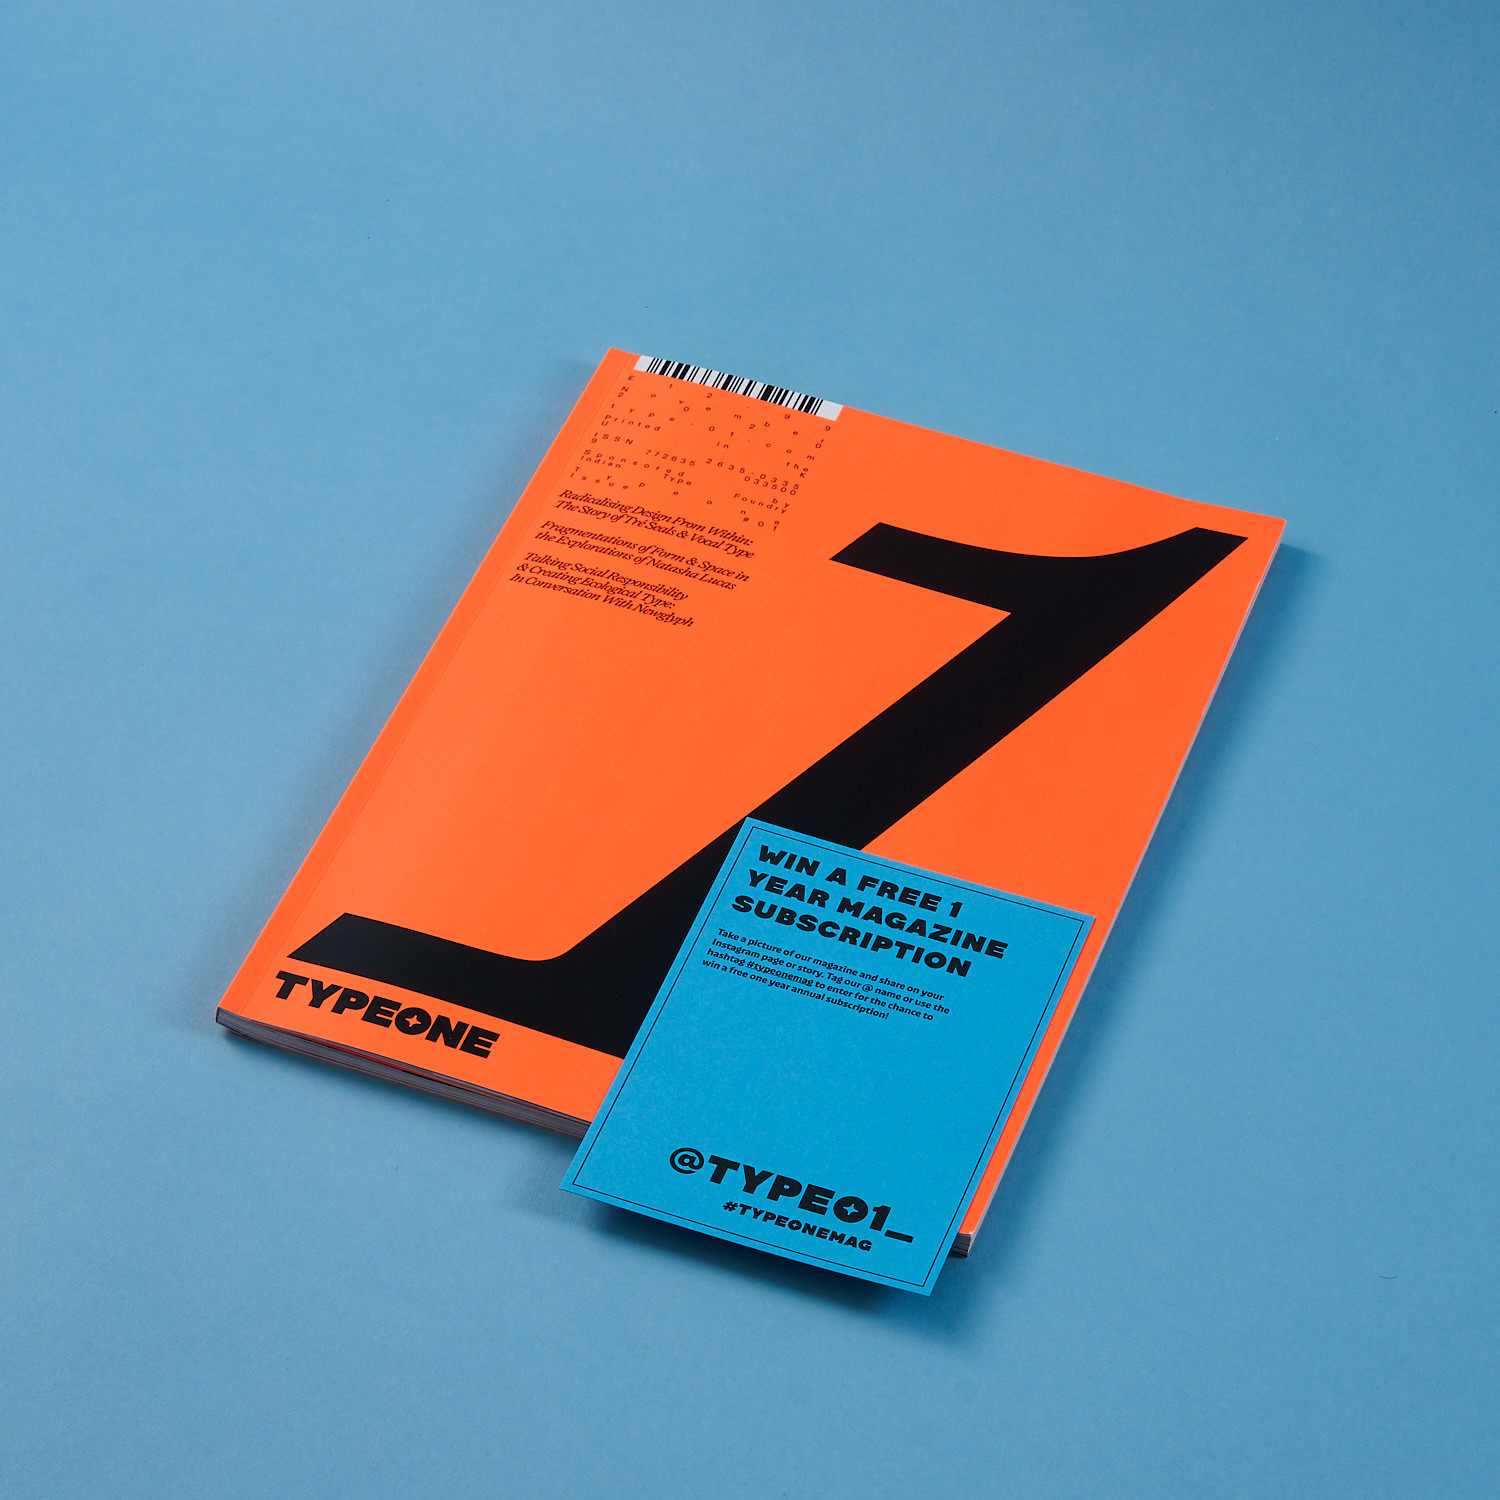 Our New TYPEONE Magazine Is Here - In The Flesh! - TYPE01